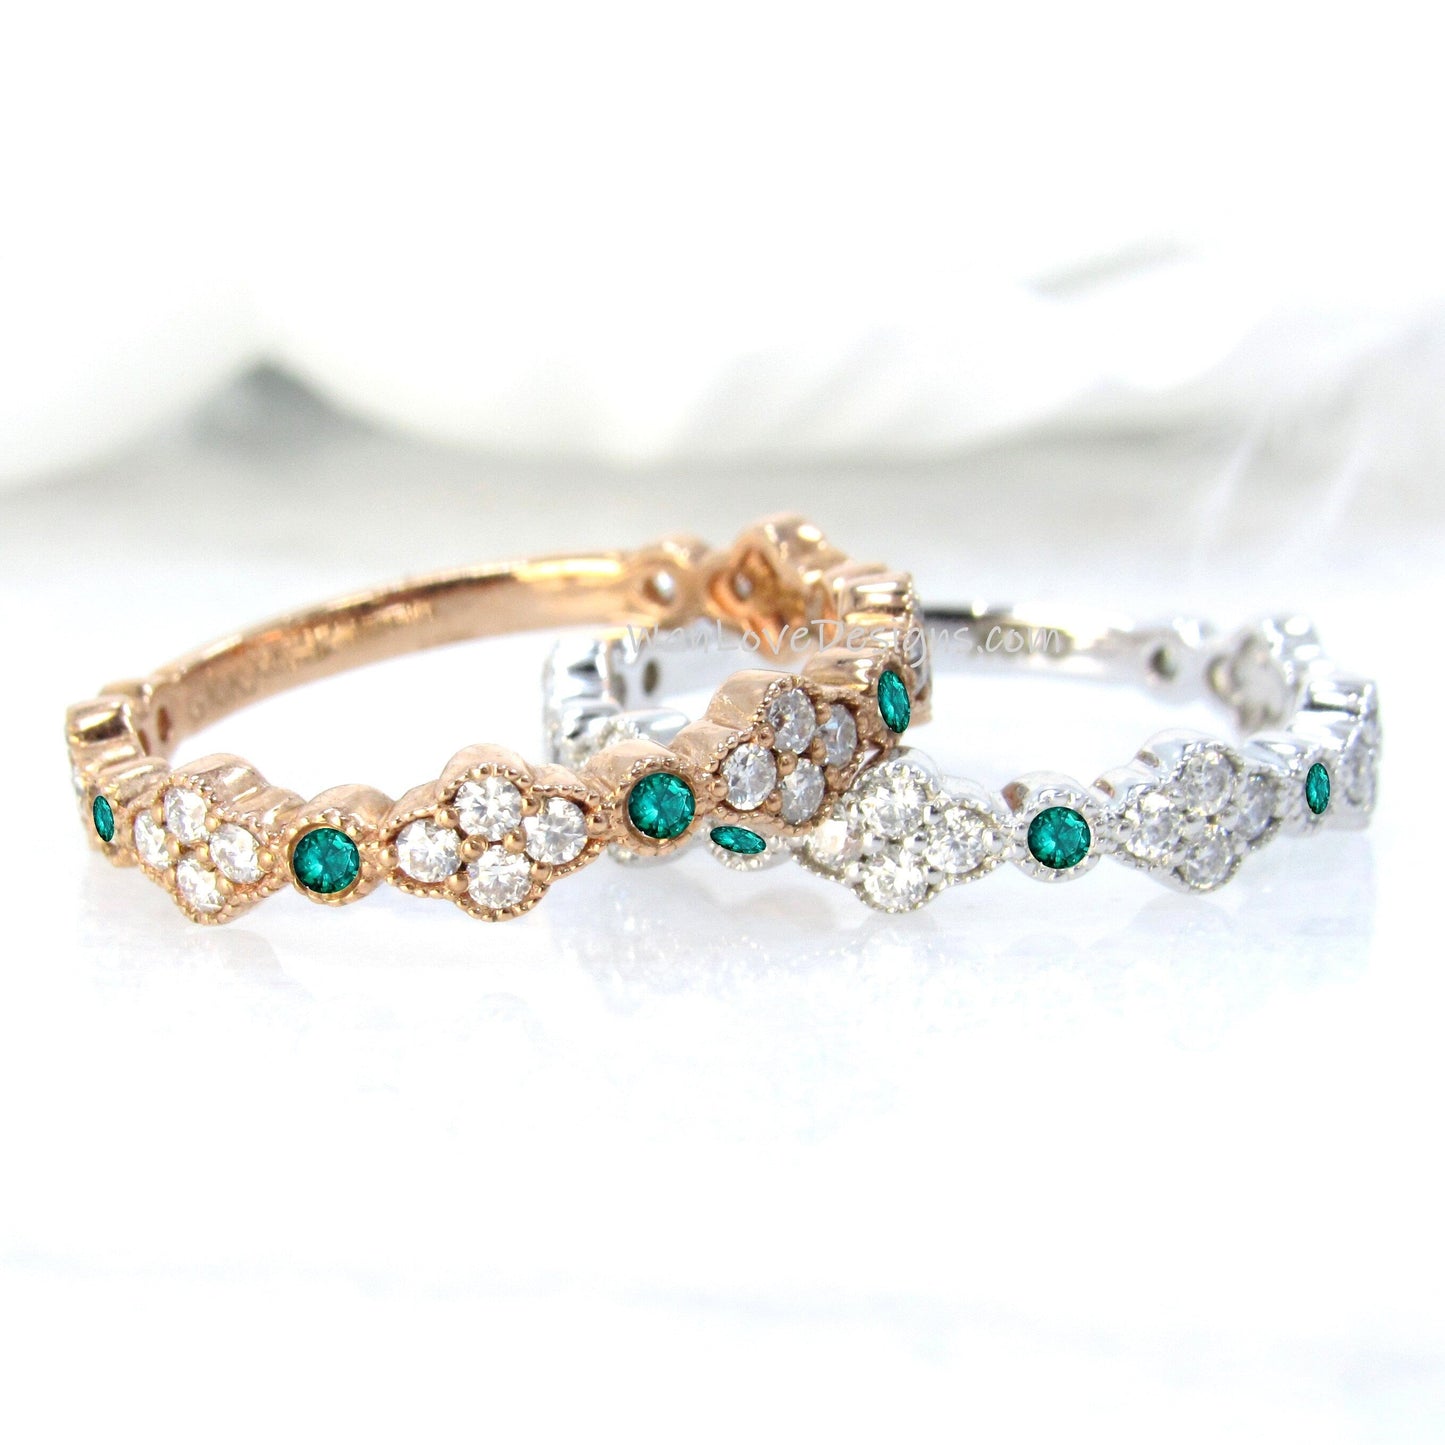 Emerald Diamond Round Clover Wedding Ring, Quatrefoil Band 14K Rose Gold, Moissanite Wedding Jewelry, Bridal Band, Matching Band,Unique Ring Wan Love Designs